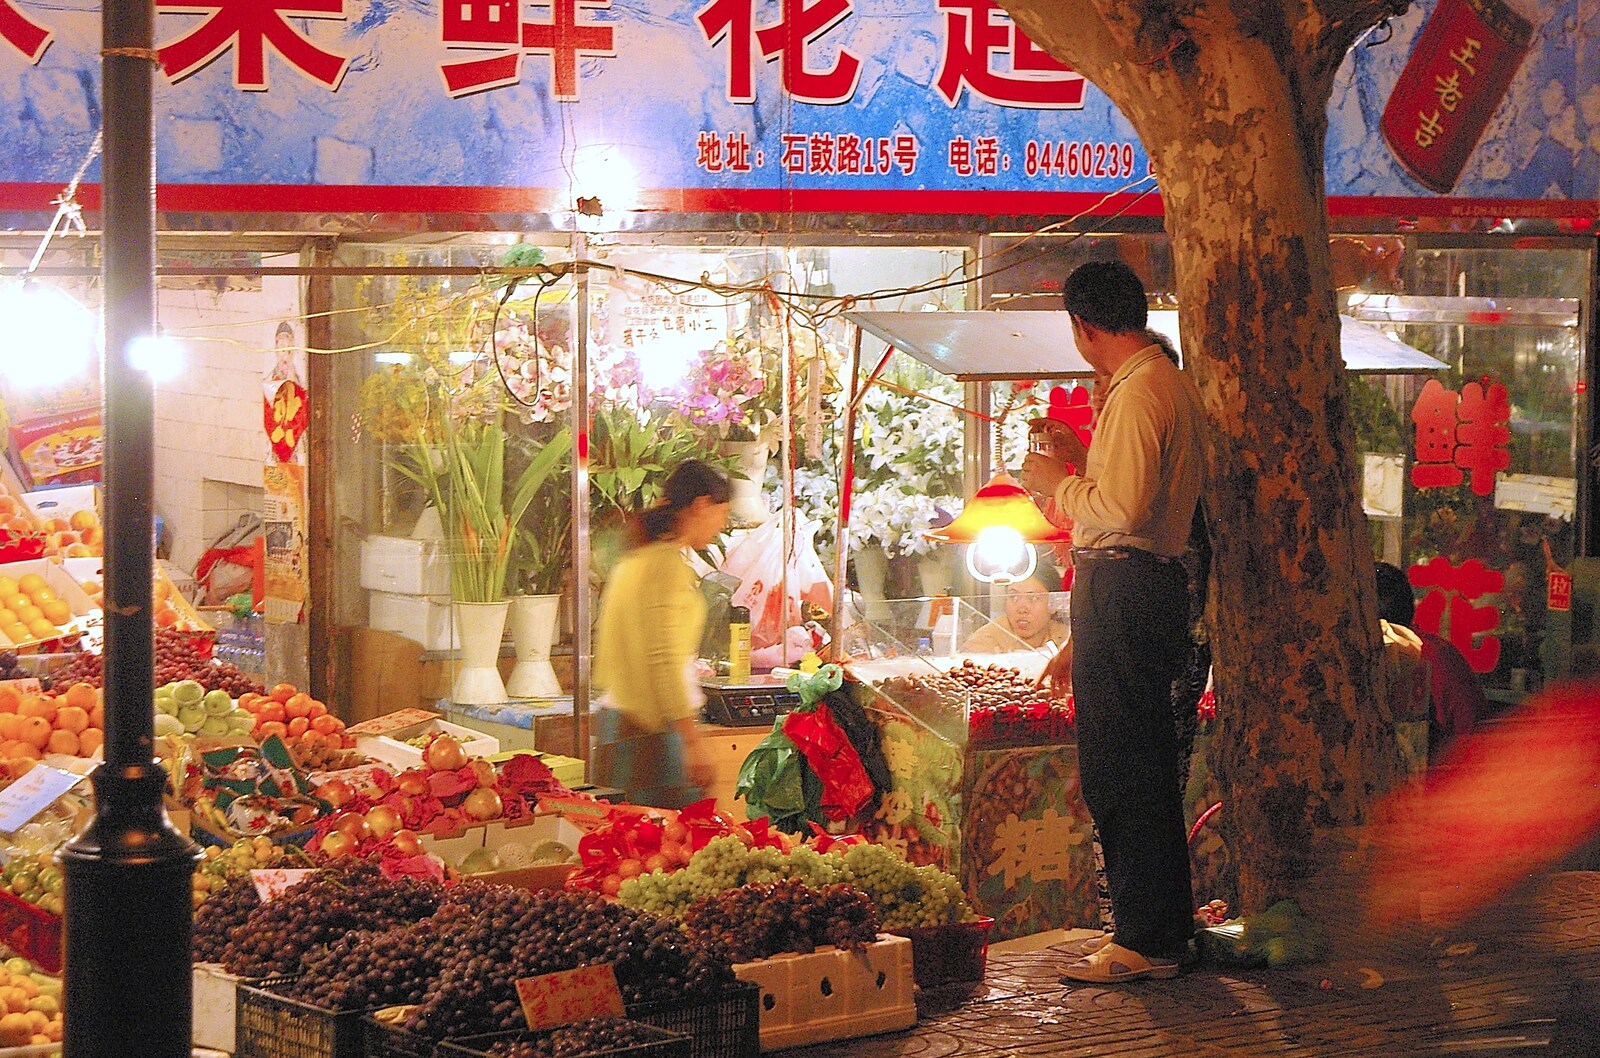 There are some open food and flower shops from Nanjing by Night, Nanjing, Jiangsu Province, China - 4th October 2006